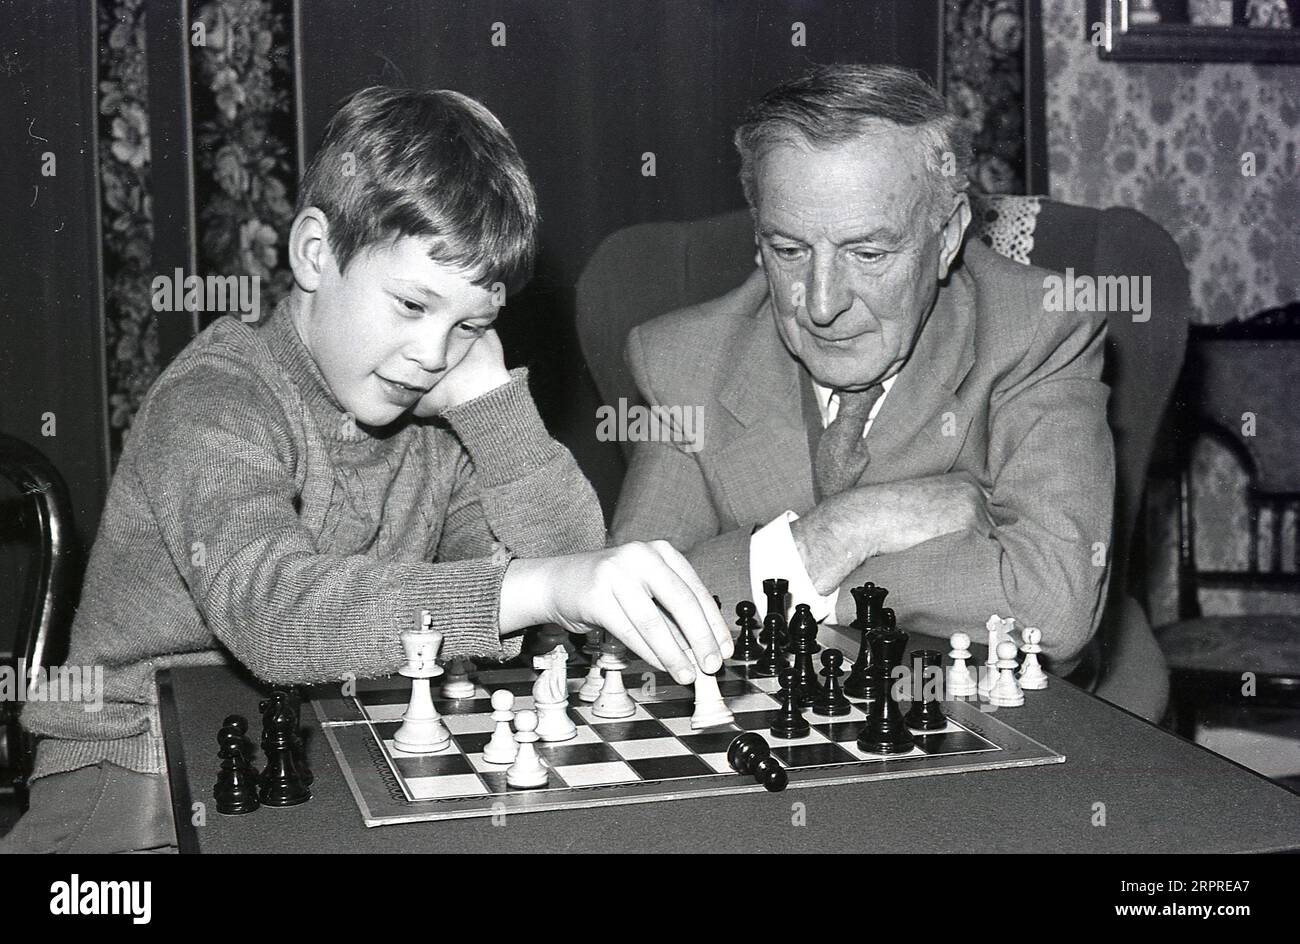 1980, sitting with his grandfather inside a front rom a young boy playing a game of chess with him, England, UK. Chess is a popular board game of strategic skill involving two players, with the object to make escape of the opponent's king impossible. Stock Photo